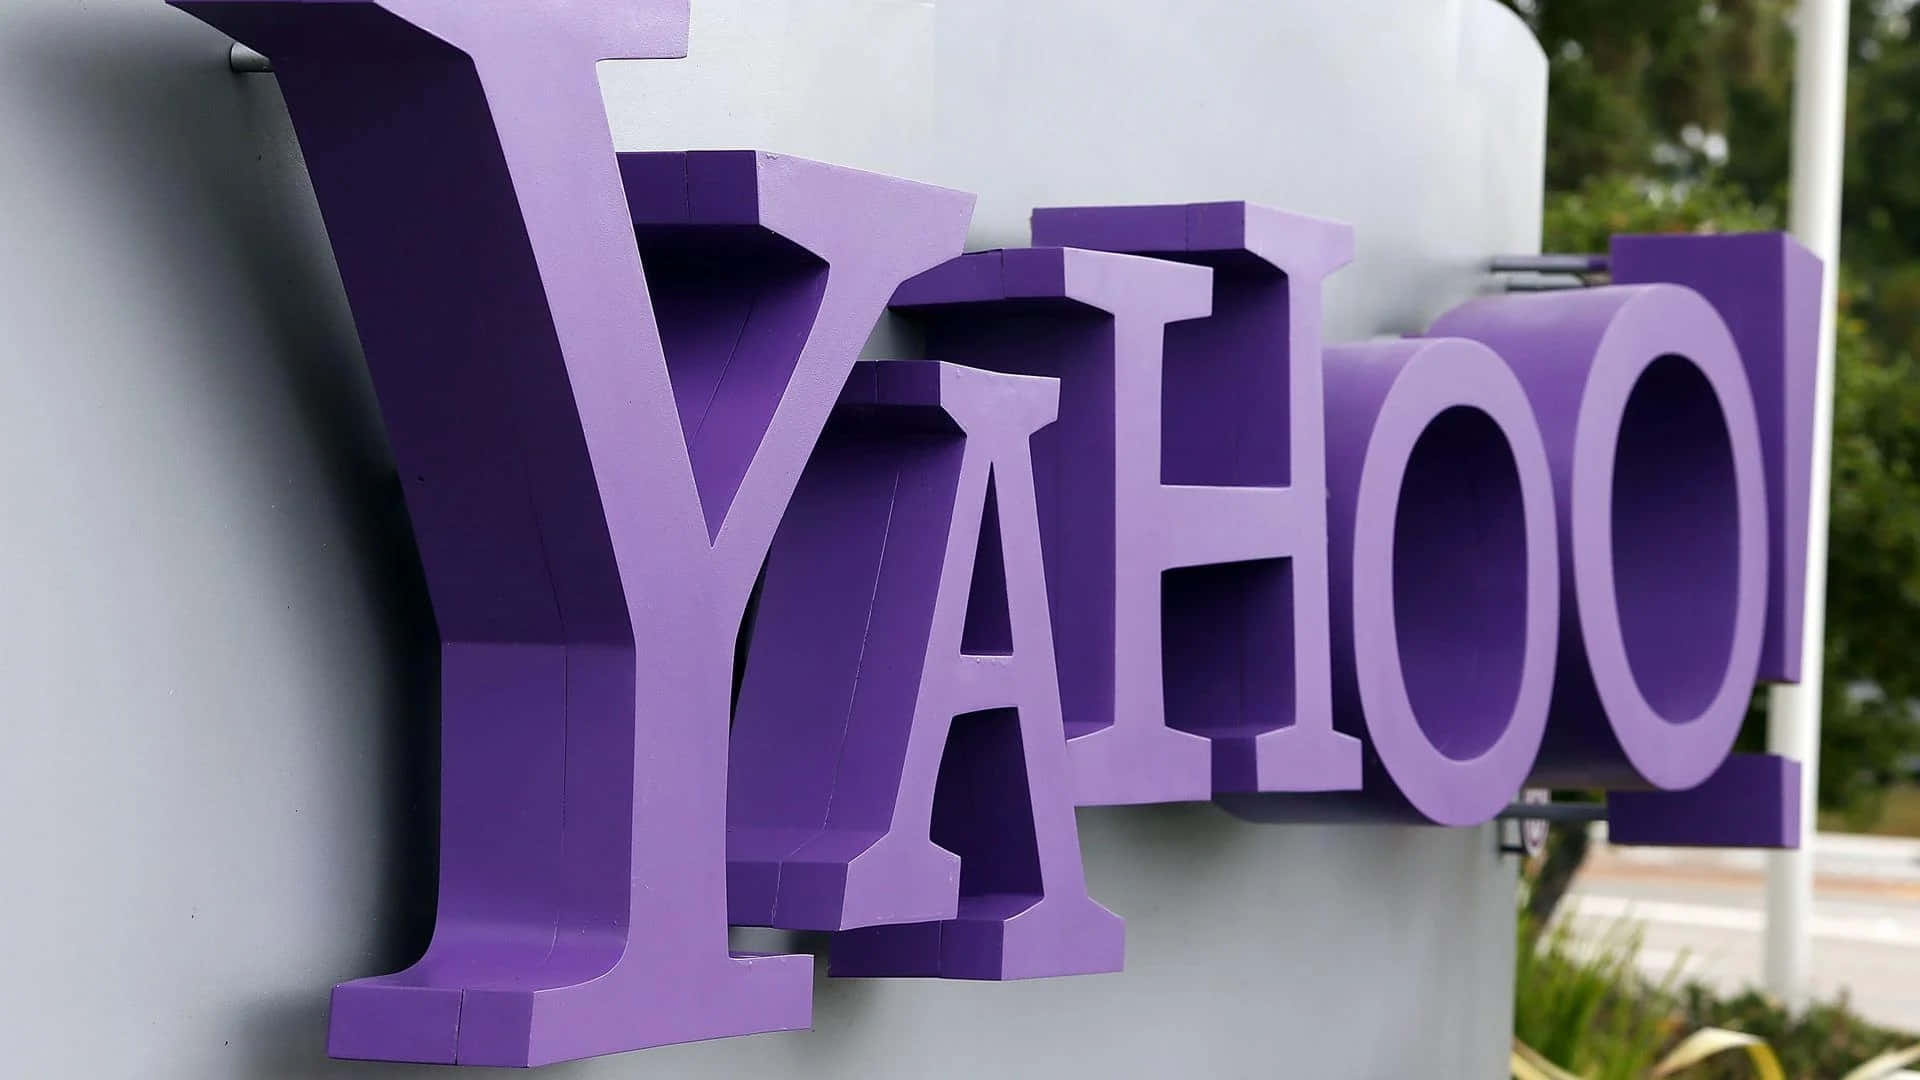 Get connected with news, entertainment, and more with Yahoo